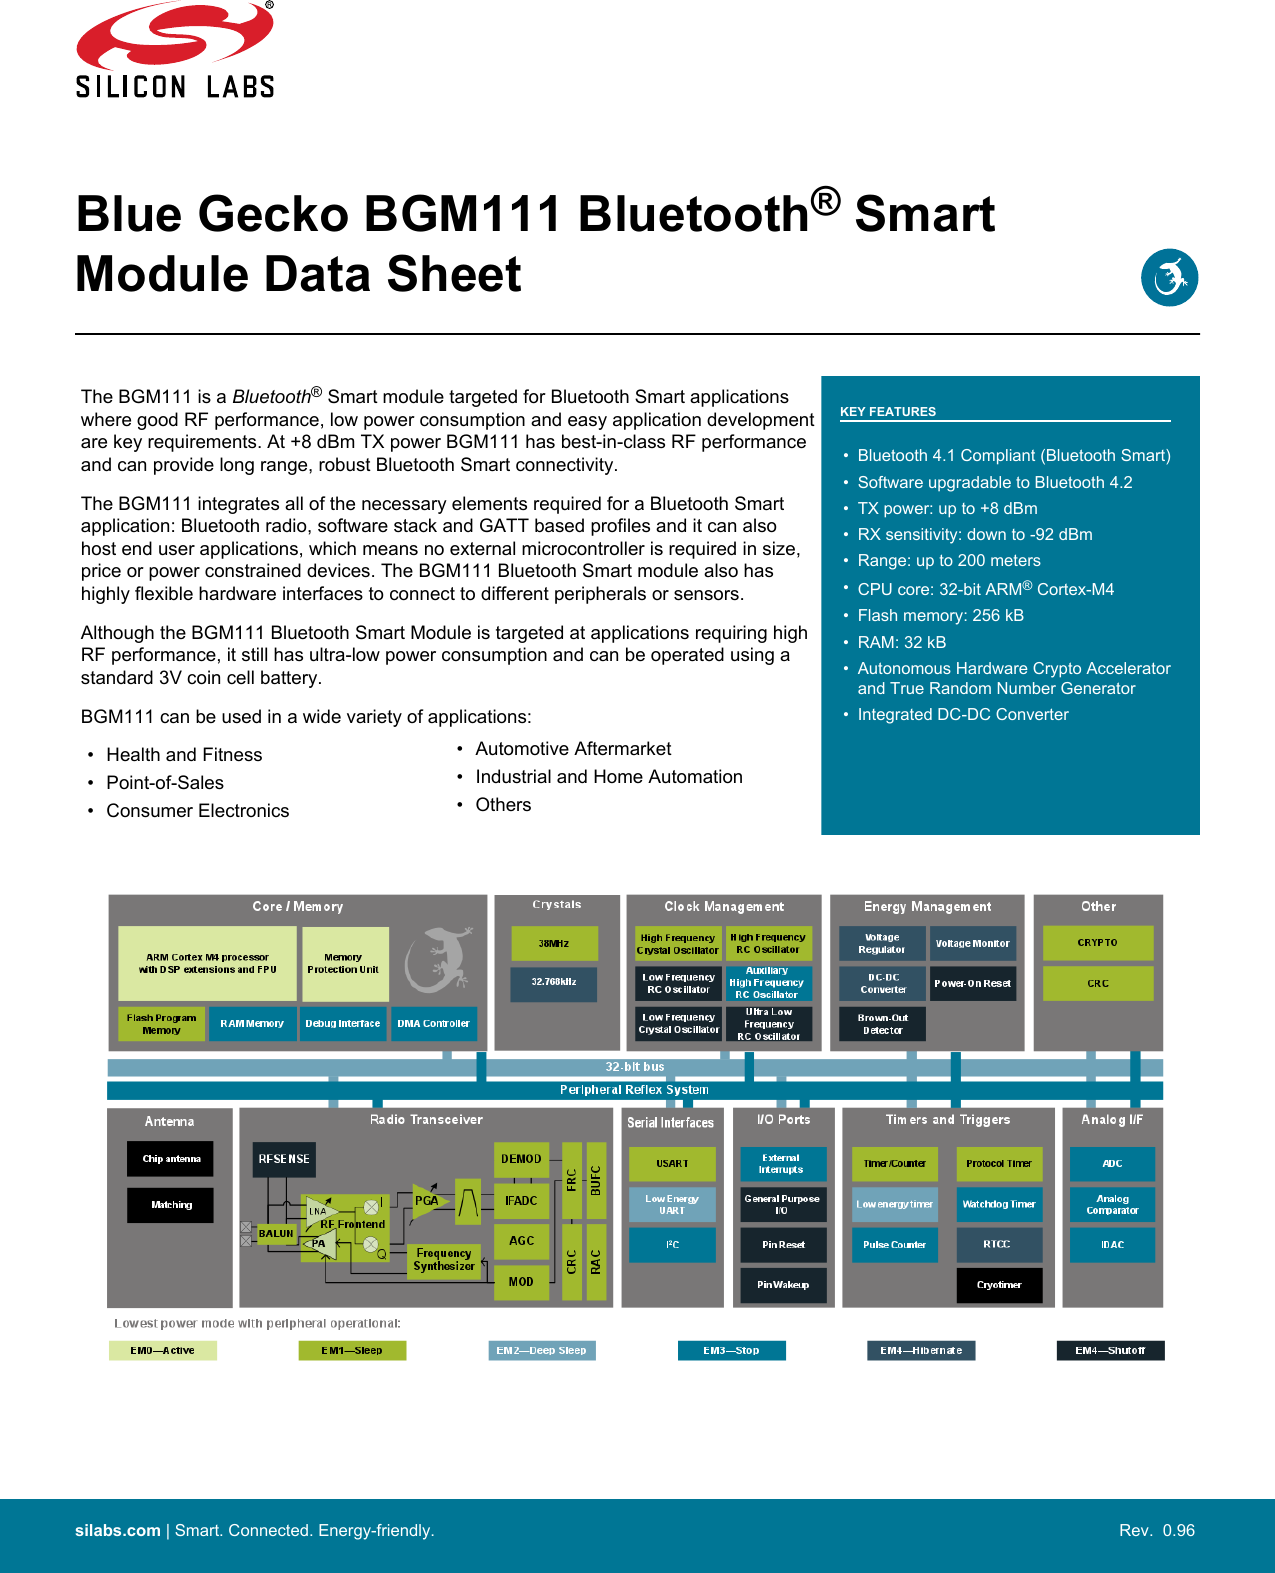 Blue Gecko BGM111 Bluetooth® SmartModule Data SheetThe BGM111 is a Bluetooth® Smart module targeted for Bluetooth Smart applicationswhere good RF performance, low power consumption and easy application developmentare key requirements. At +8 dBm TX power BGM111 has best-in-class RF performanceand can provide long range, robust Bluetooth Smart connectivity.The BGM111 integrates all of the necessary elements required for a Bluetooth Smartapplication: Bluetooth radio, software stack and GATT based profiles and it can alsohost end user applications, which means no external microcontroller is required in size,price or power constrained devices. The BGM111 Bluetooth Smart module also hashighly flexible hardware interfaces to connect to different peripherals or sensors.Although the BGM111 Bluetooth Smart Module is targeted at applications requiring highRF performance, it still has ultra-low power consumption and can be operated using astandard 3V coin cell battery.BGM111 can be used in a wide variety of applications:KEY FEATURES• Bluetooth 4.1 Compliant (Bluetooth Smart)• Software upgradable to Bluetooth 4.2• TX power: up to +8 dBm• RX sensitivity: down to -92 dBm• Range: up to 200 meters•CPU core: 32-bit ARM® Cortex-M4• Flash memory: 256 kB• RAM: 32 kB• Autonomous Hardware Crypto Acceleratorand True Random Number Generator• Integrated DC-DC Converter• Health and Fitness• Point-of-Sales• Consumer Electronics• Automotive Aftermarket• Industrial and Home Automation• Otherssilabs.com | Smart. Connected. Energy-friendly. Rev.  0.96 